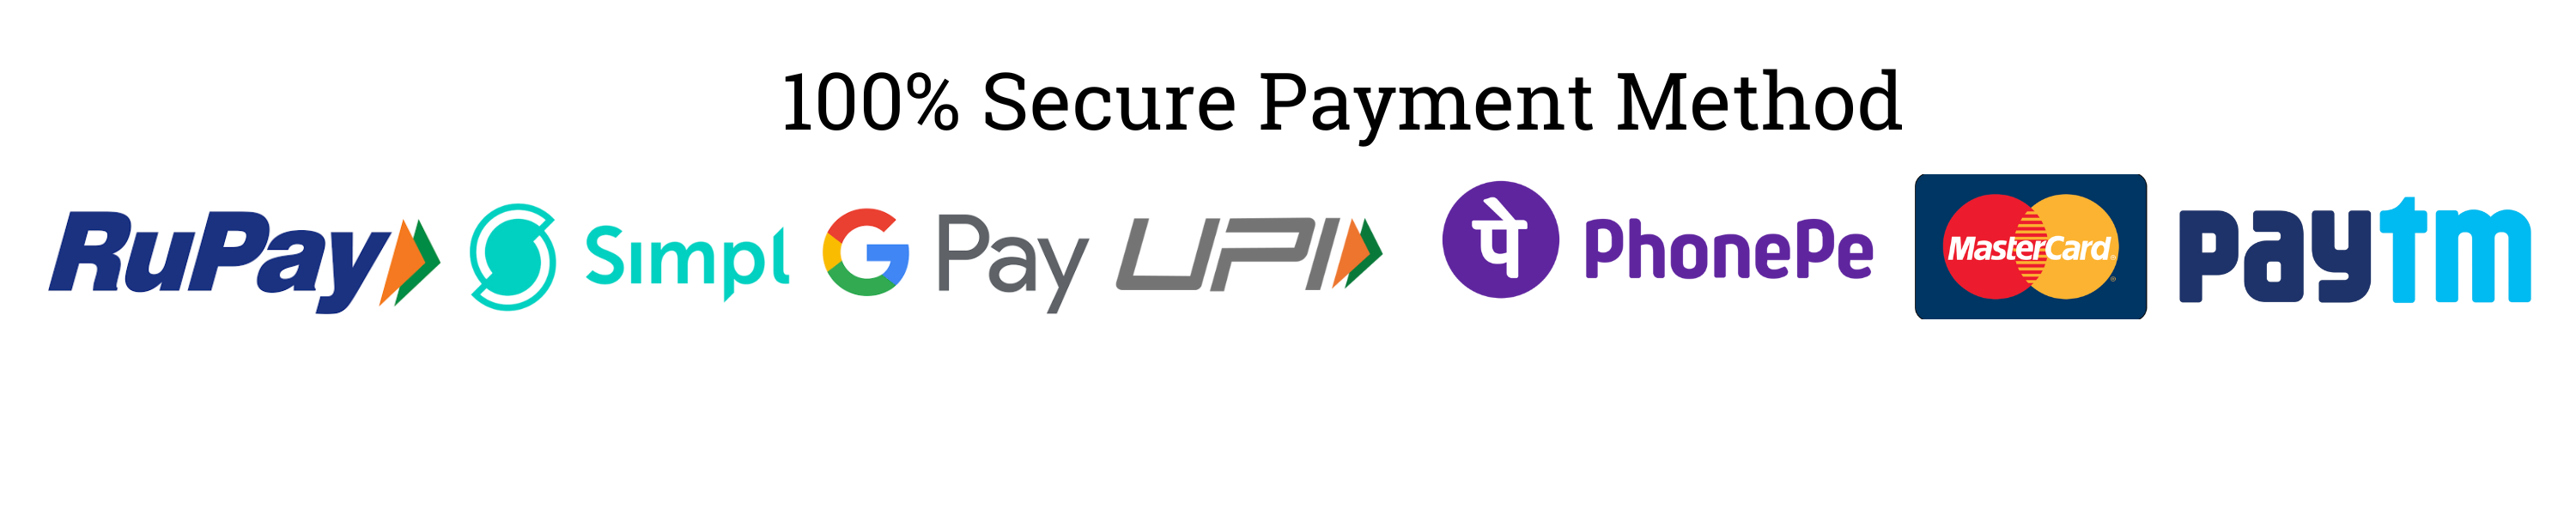 secure payment method